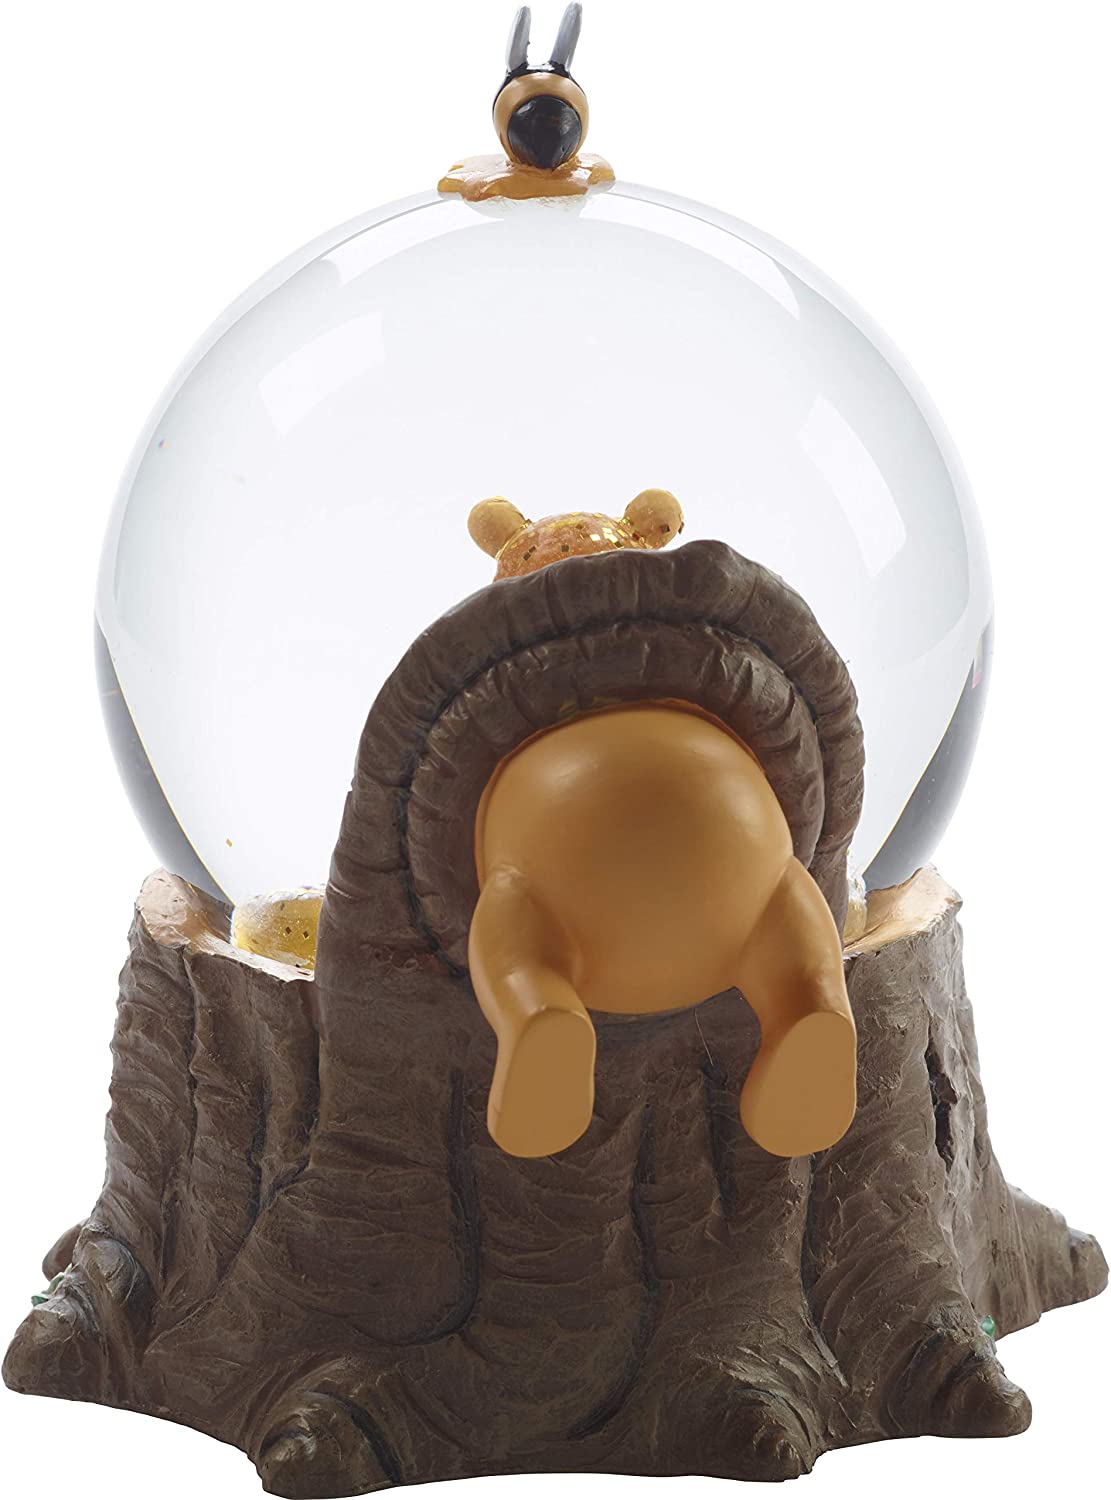 A back view of a Winnie The Pooh snow globe. It shows Winnie's lower half of his body hanging out of the globe itself.